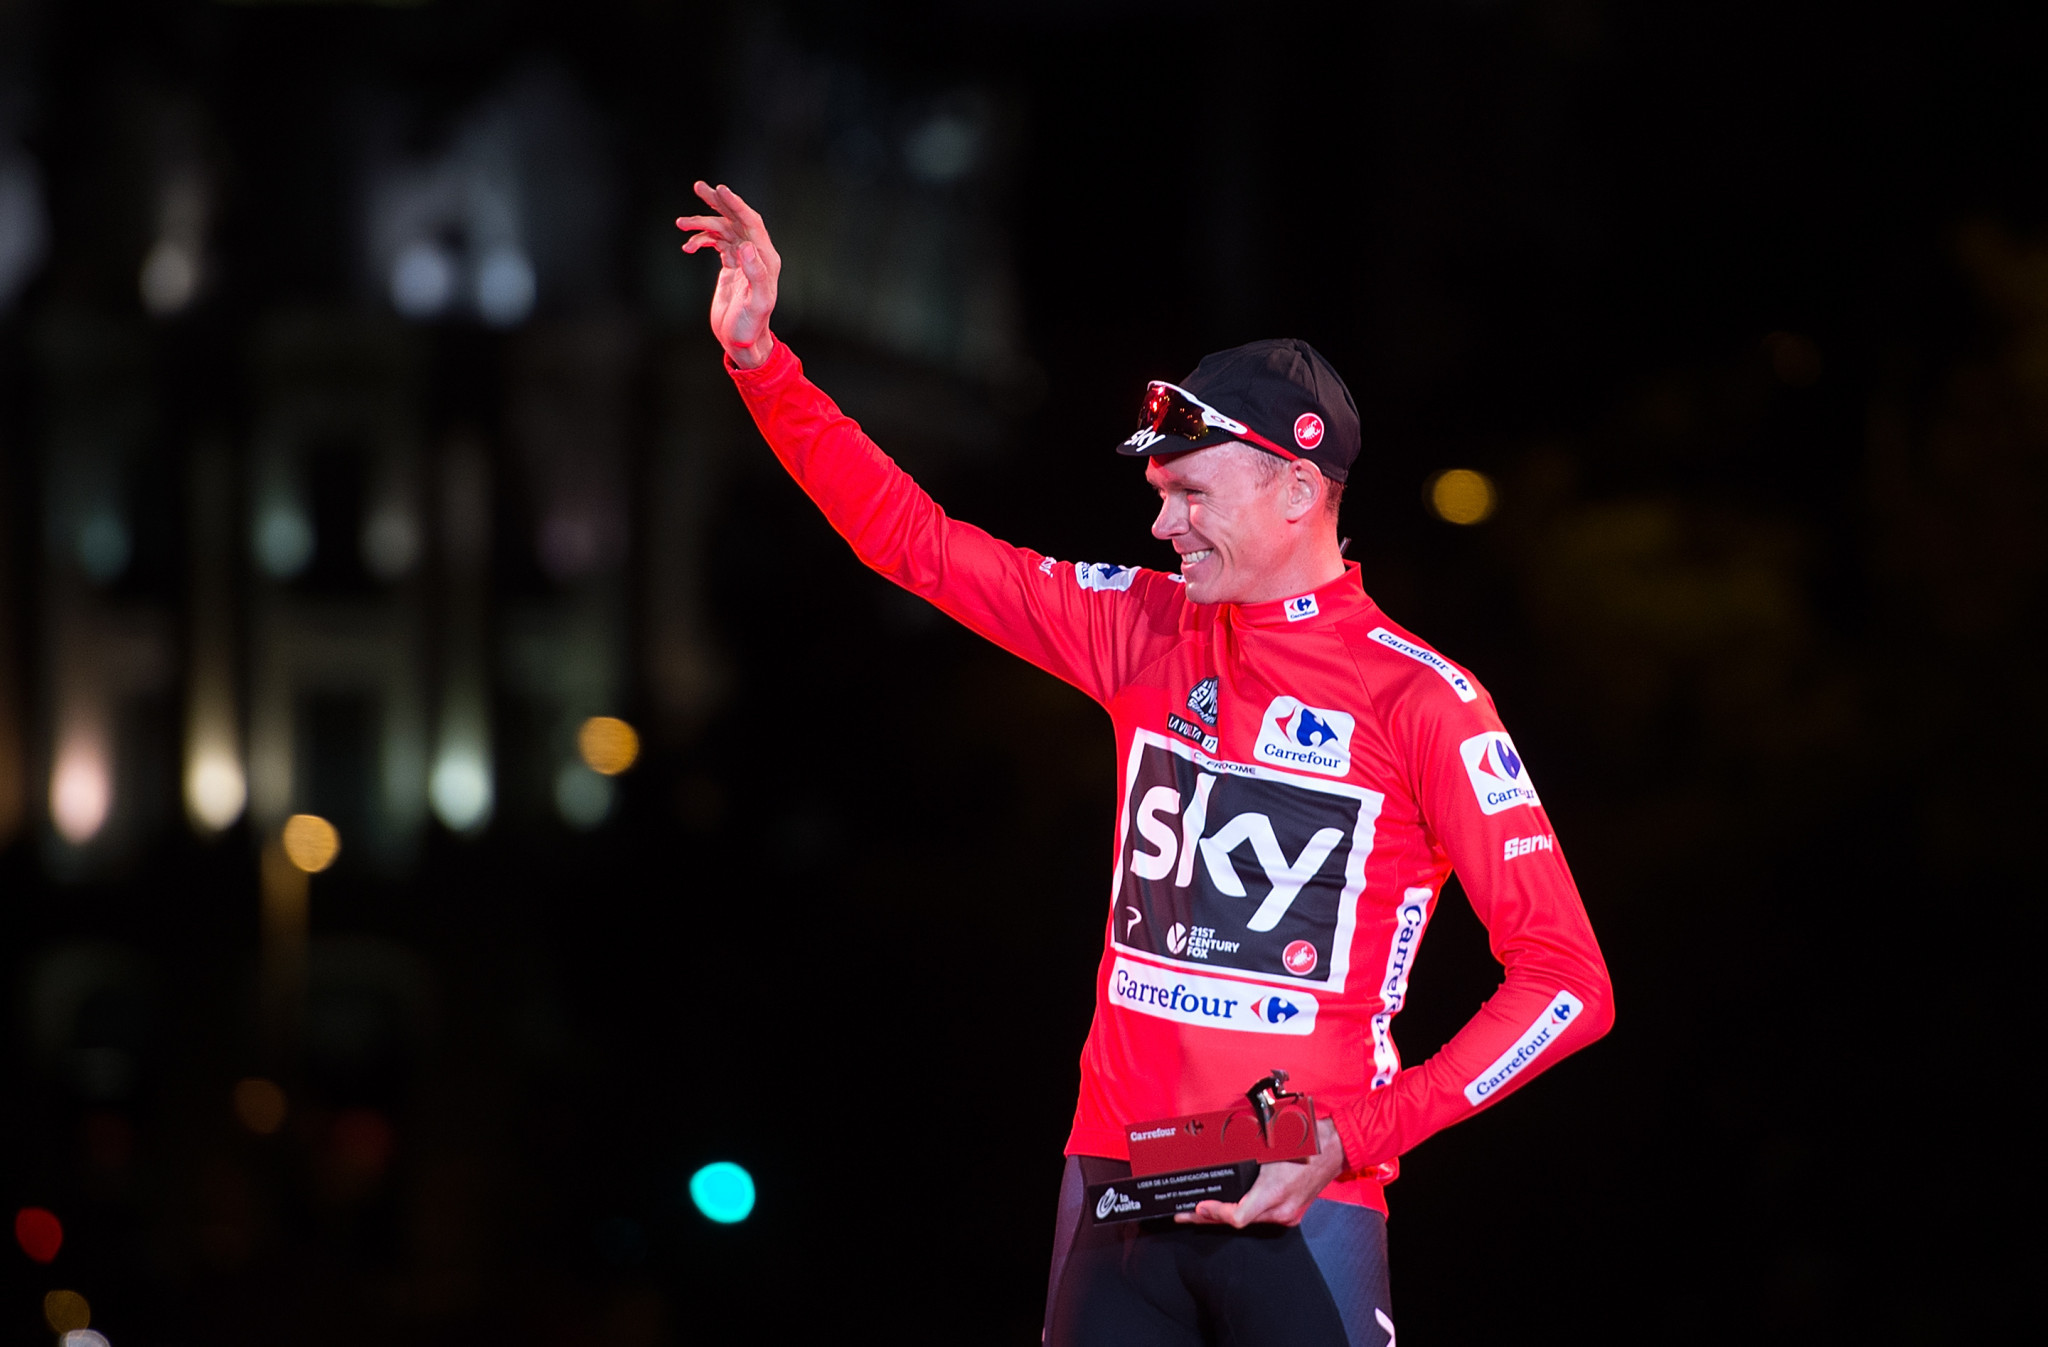 Chris Froome won the Vuelta last year before his failed test was announced ©Getty Images